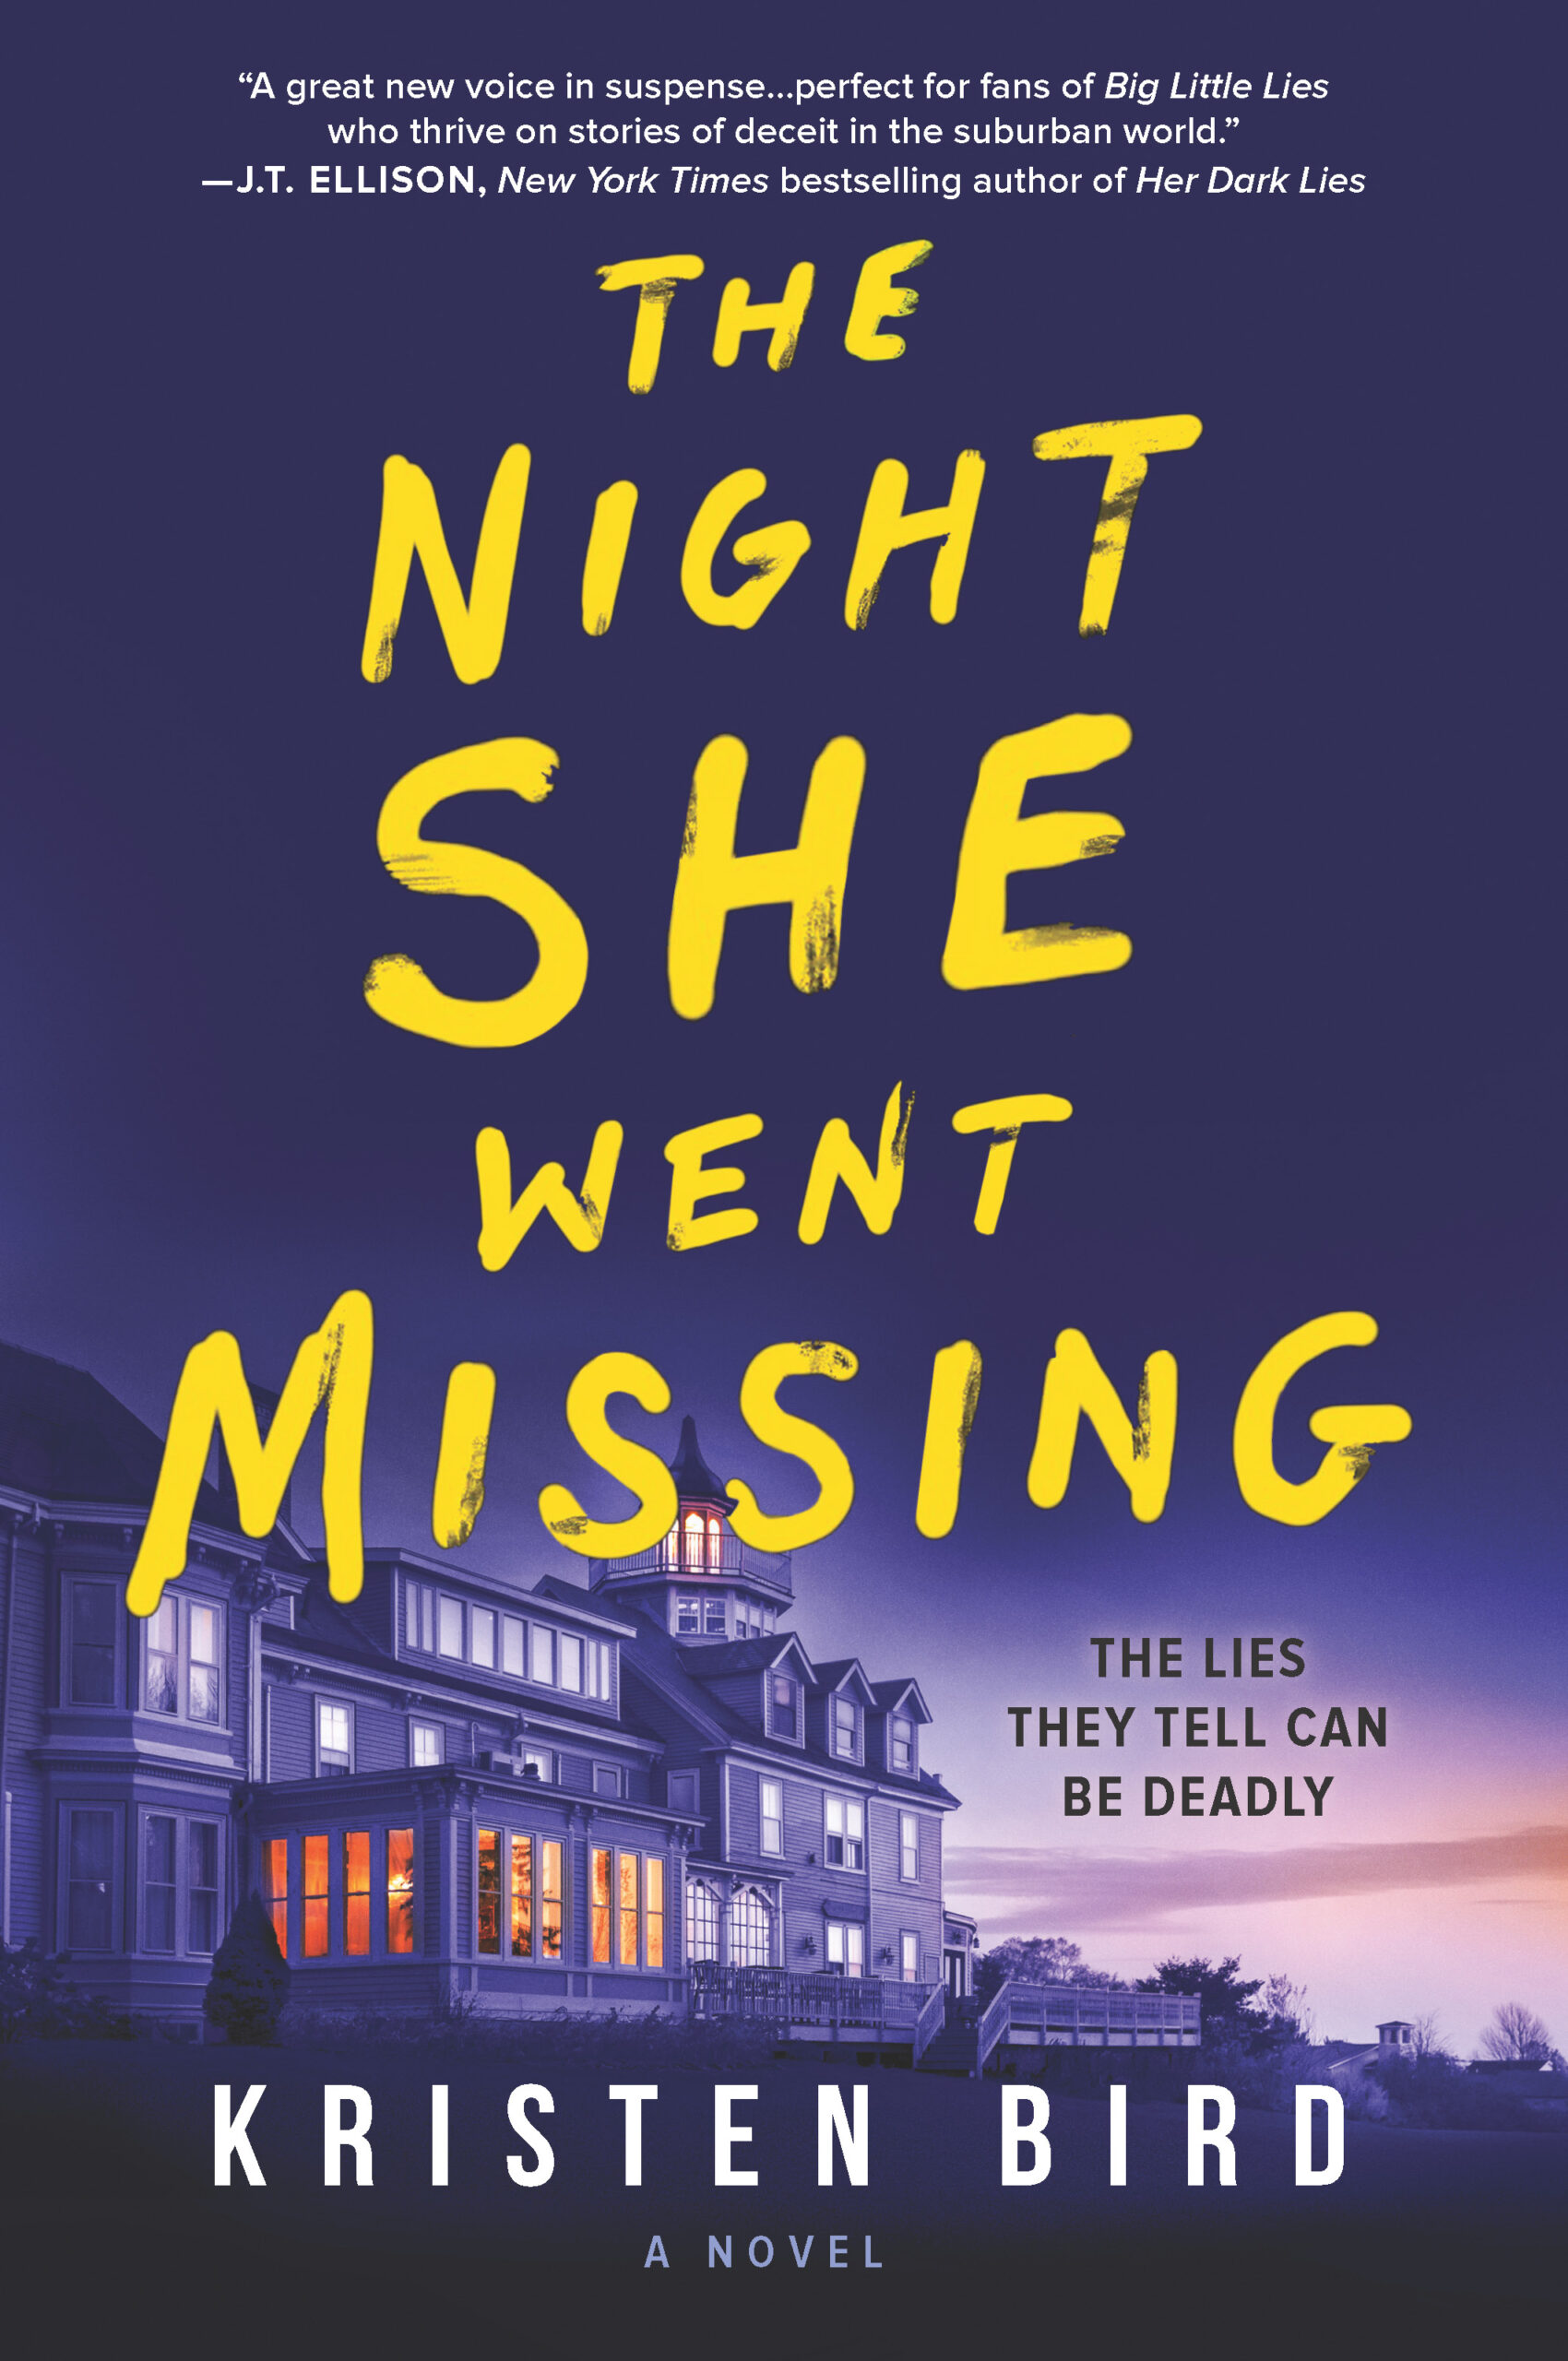 Review: The Night She Went Missing by Kristen Bird